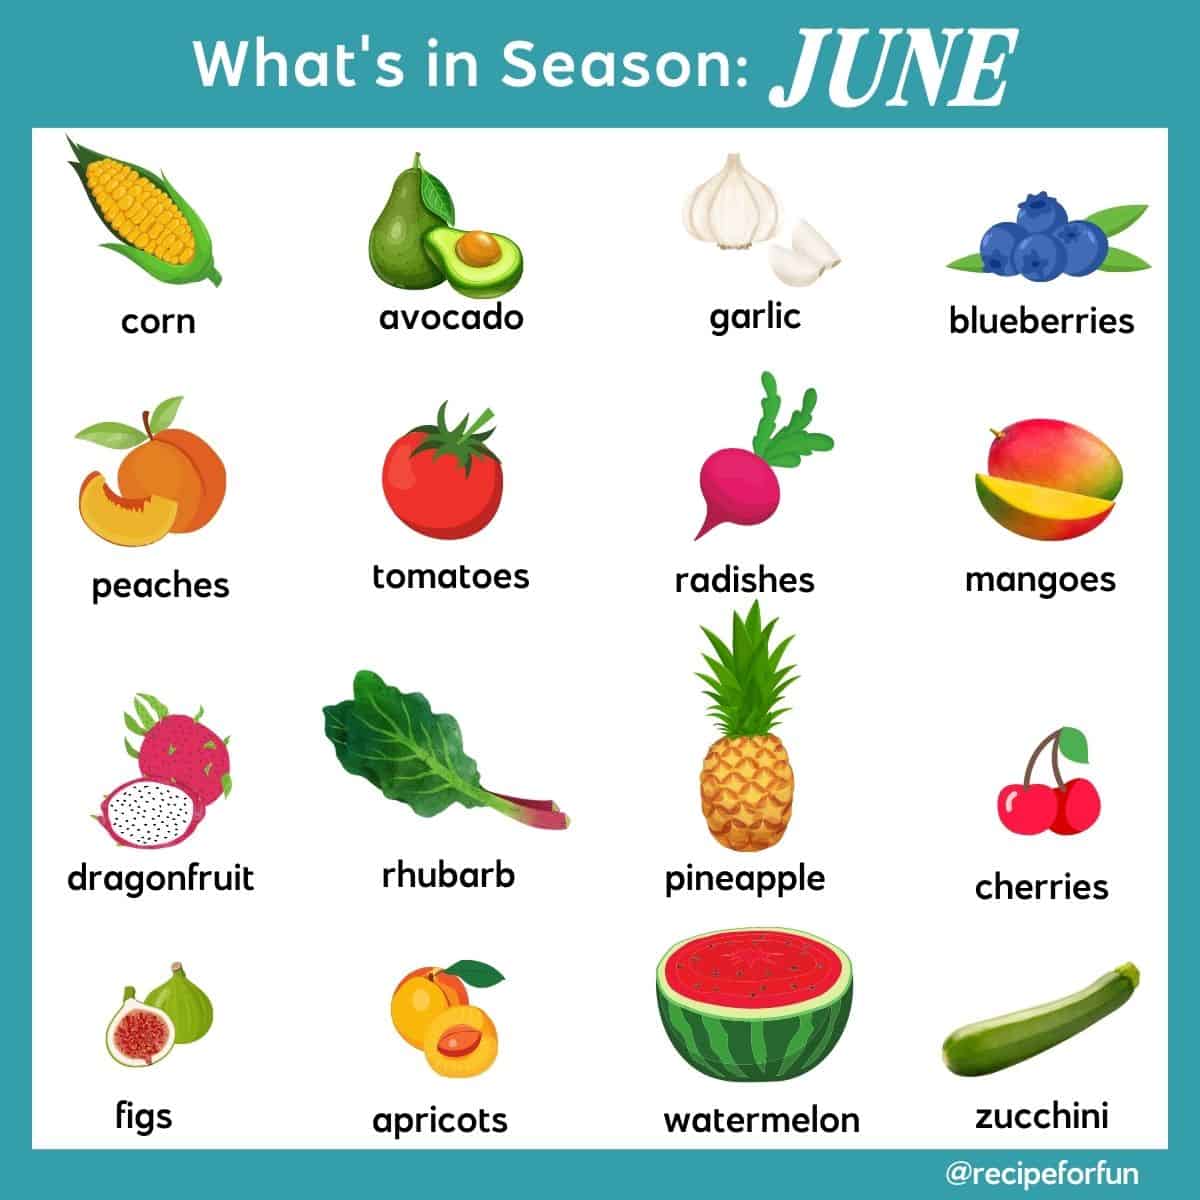 An illustrated infographic of what produce is in season in May. The images includes fruits in season in June and vegetables in season in June.